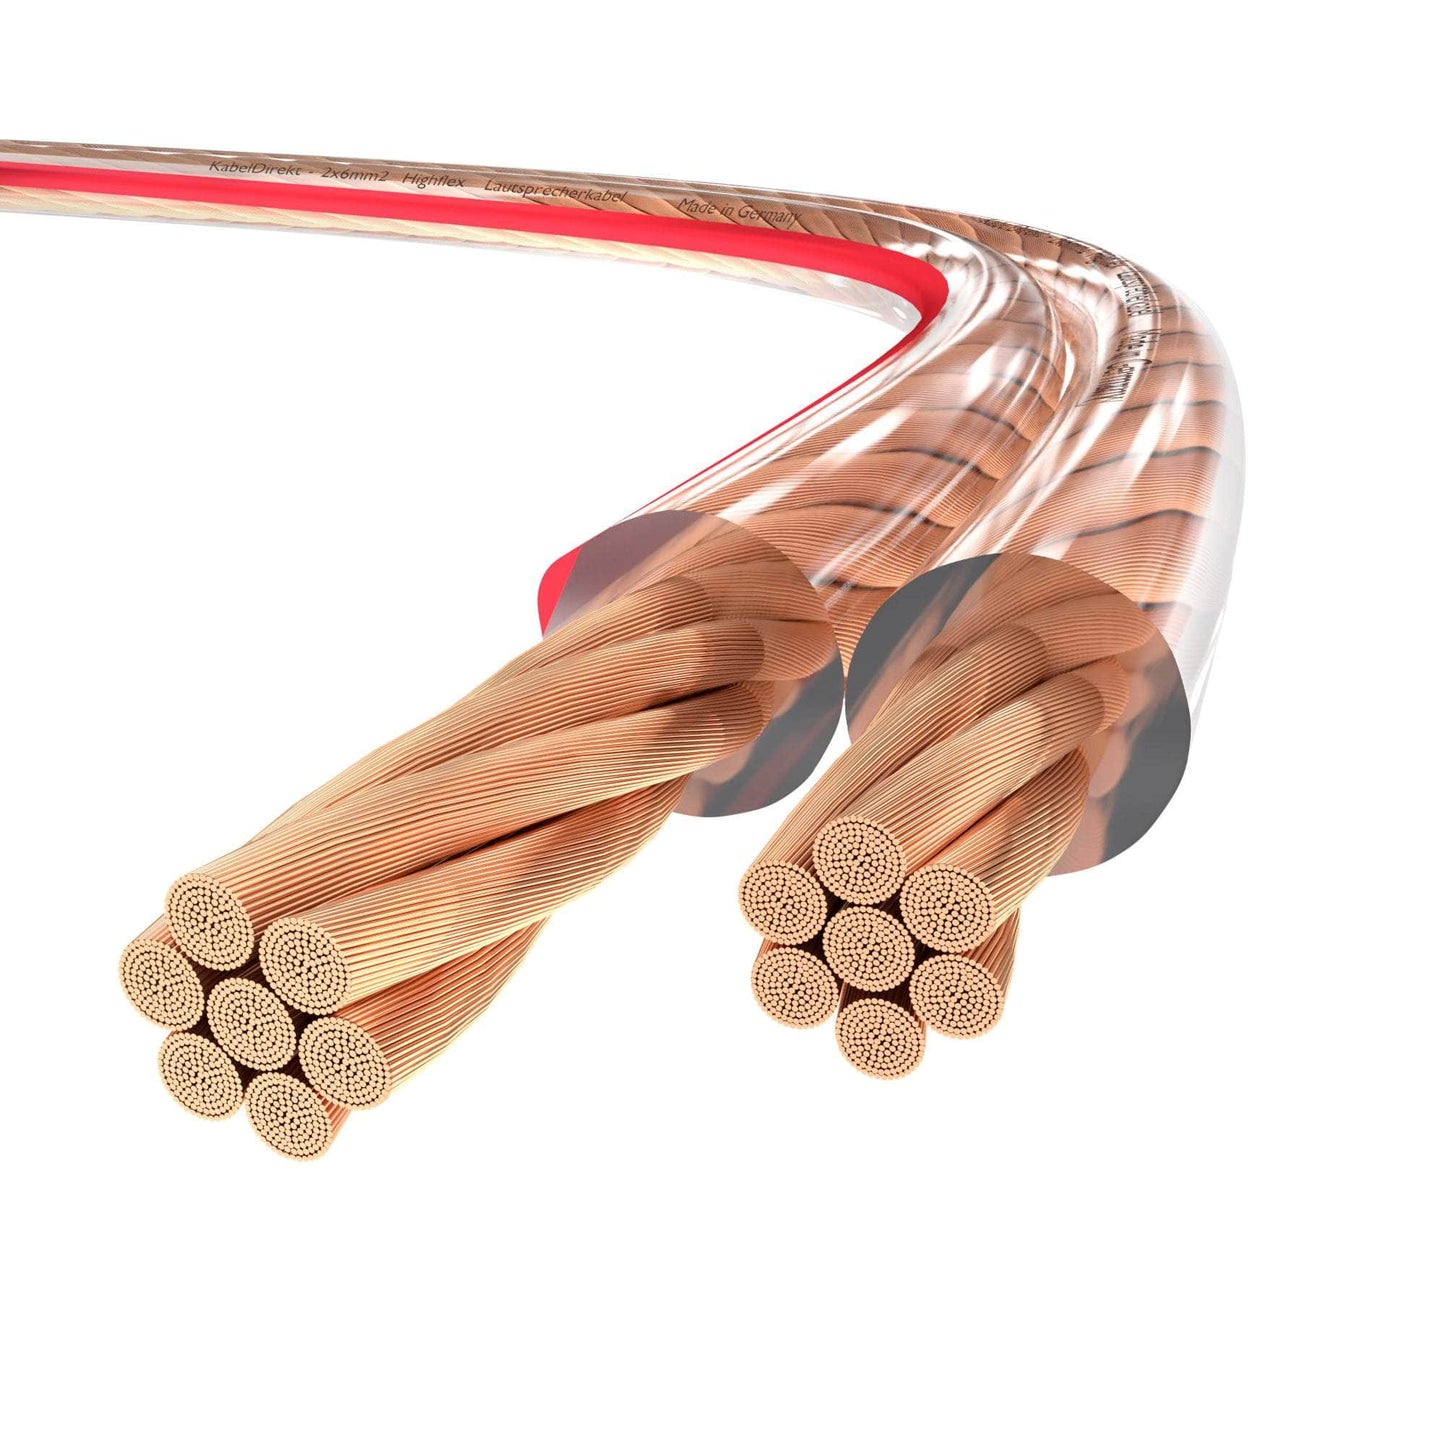 Speaker Cable - Pure Copper, Polarity Marked, Made in Germany